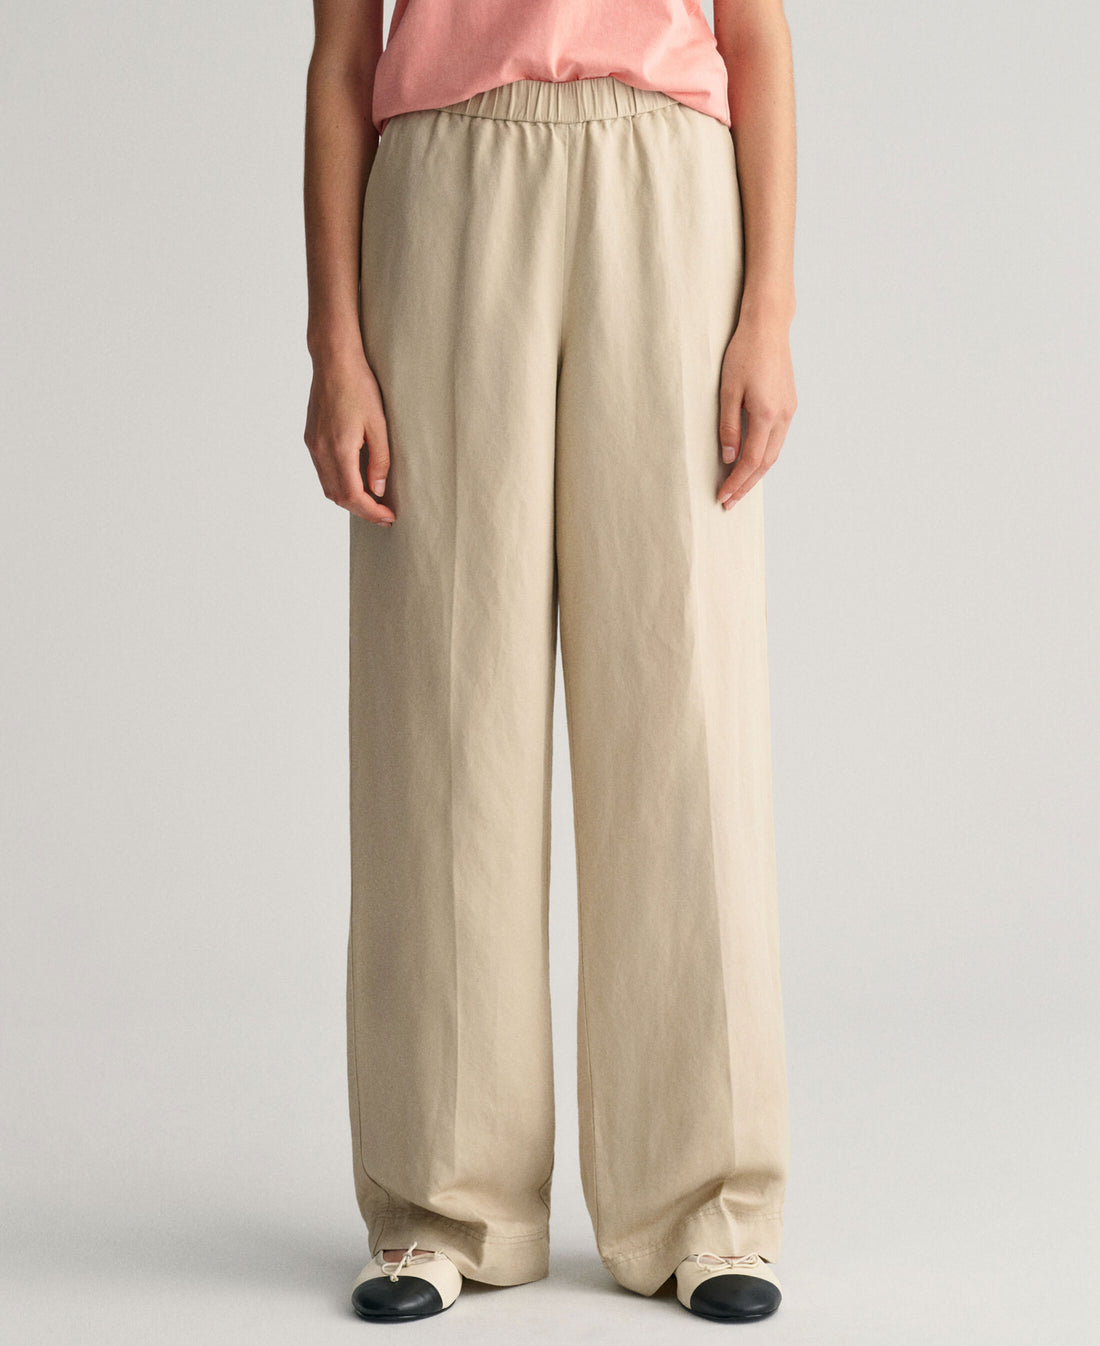 Relaxed Fit Linen Blend Pull-On Pants - Dry Sand